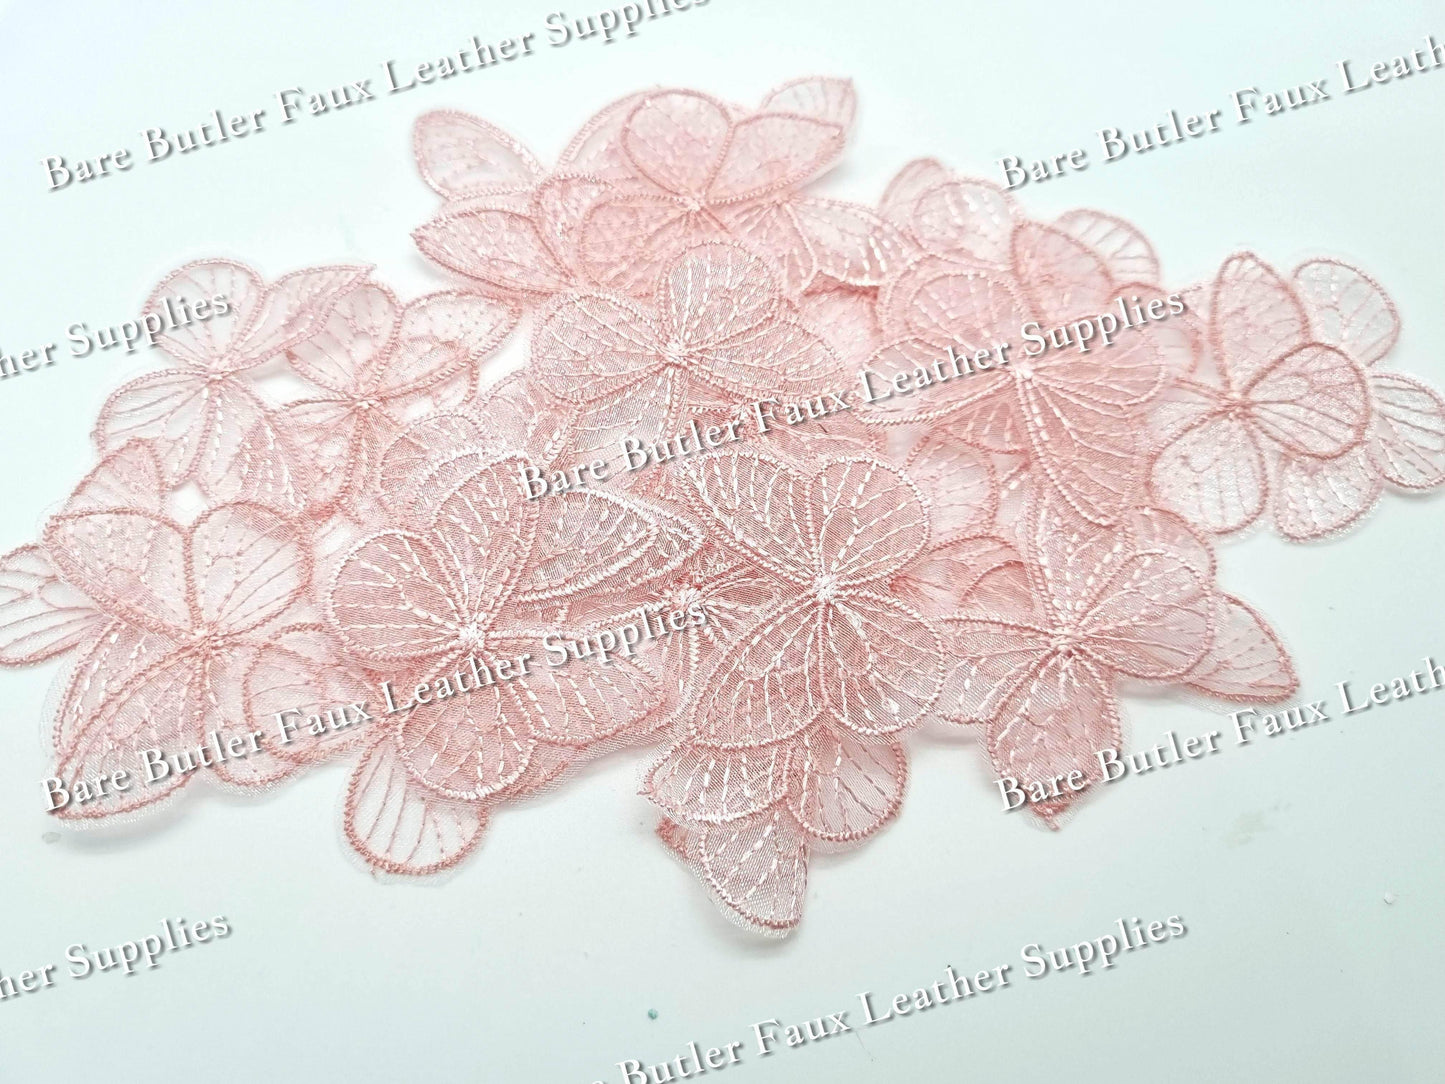 Lace Butterfly Embellishments - accessories, Butterfly, Embelishment, lace - Bare Butler Faux Leather Supplies 